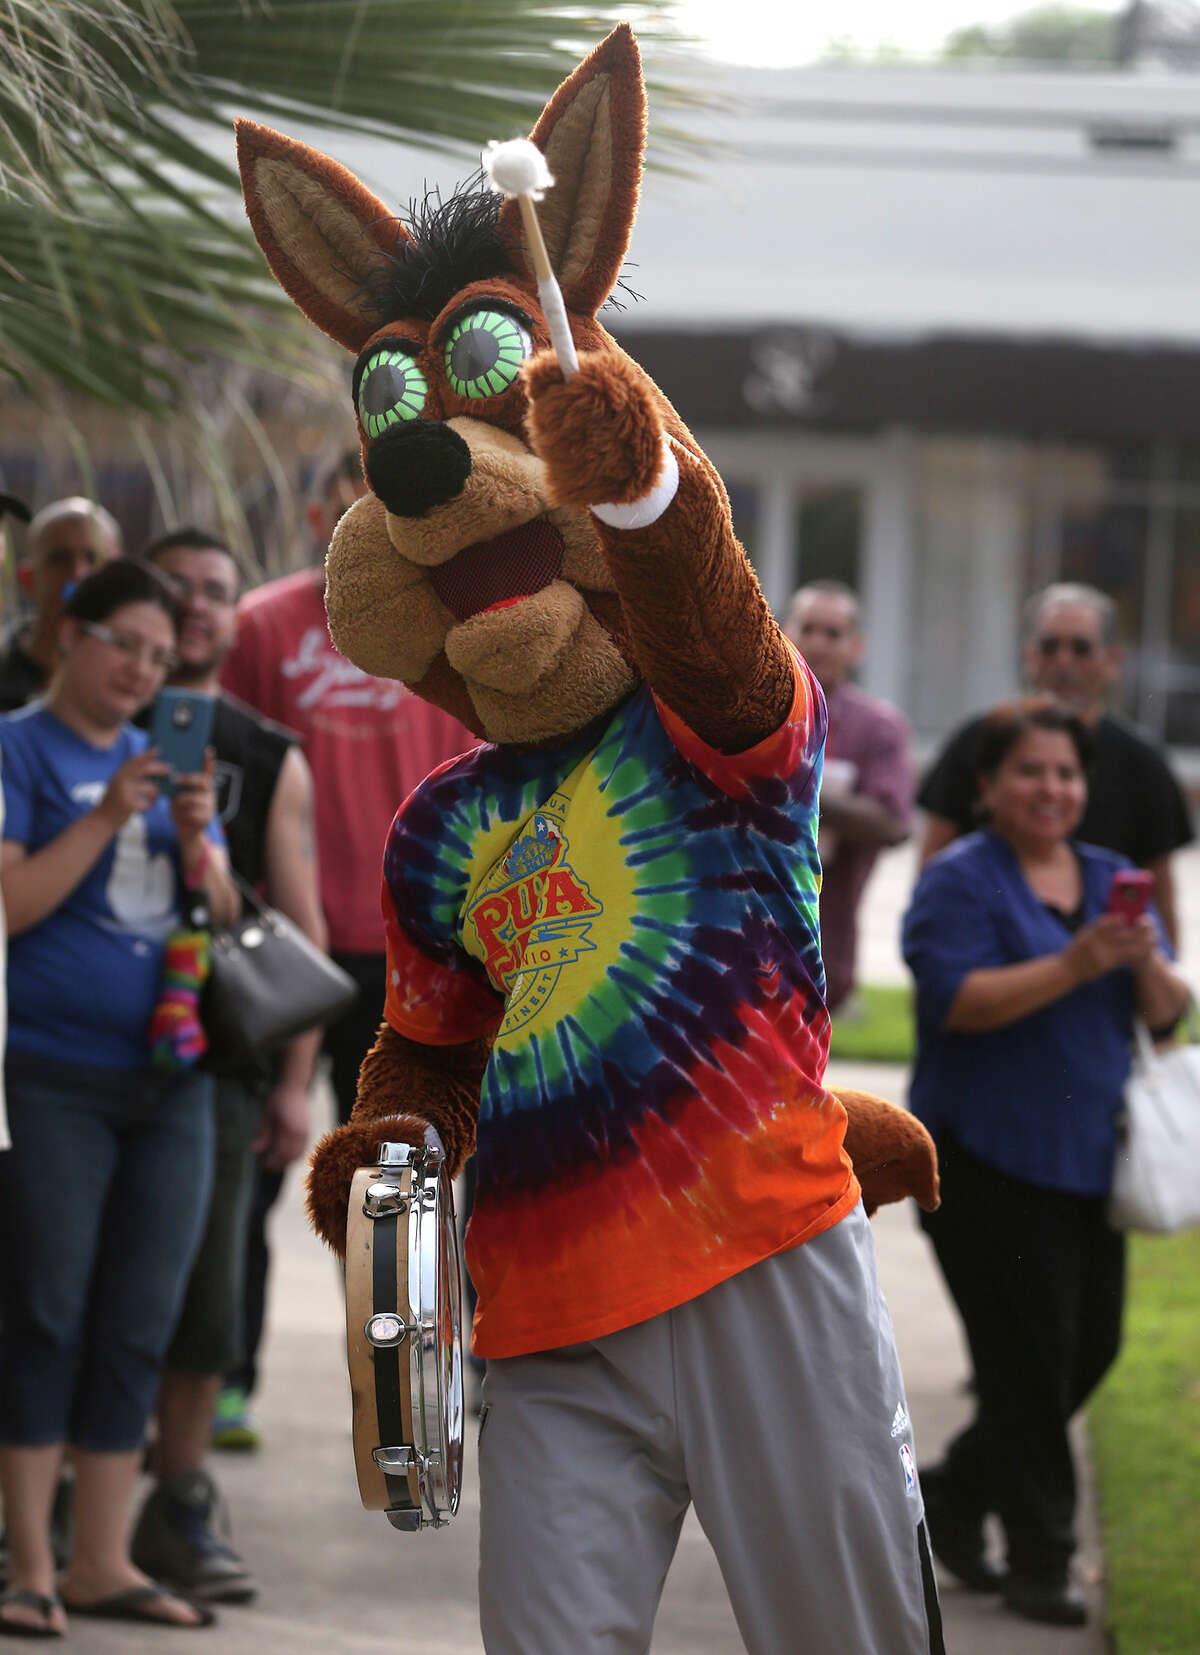 The Spurs Coyote (center) whips up enthusiasm Friday March 20, 2015 for customers in line for the purchase of Fiesta event tickets at the Fiesta Store at 2611 Broadway. There were two lines at the event. One was for the purchase of Fiesta event tickets such as parades and the other line was for the purchase of a new Coyote Fiesta medal. Customers are being limited to buying a maximum of five Coyote medals. Fiesta runs from April 16-26, 2015.